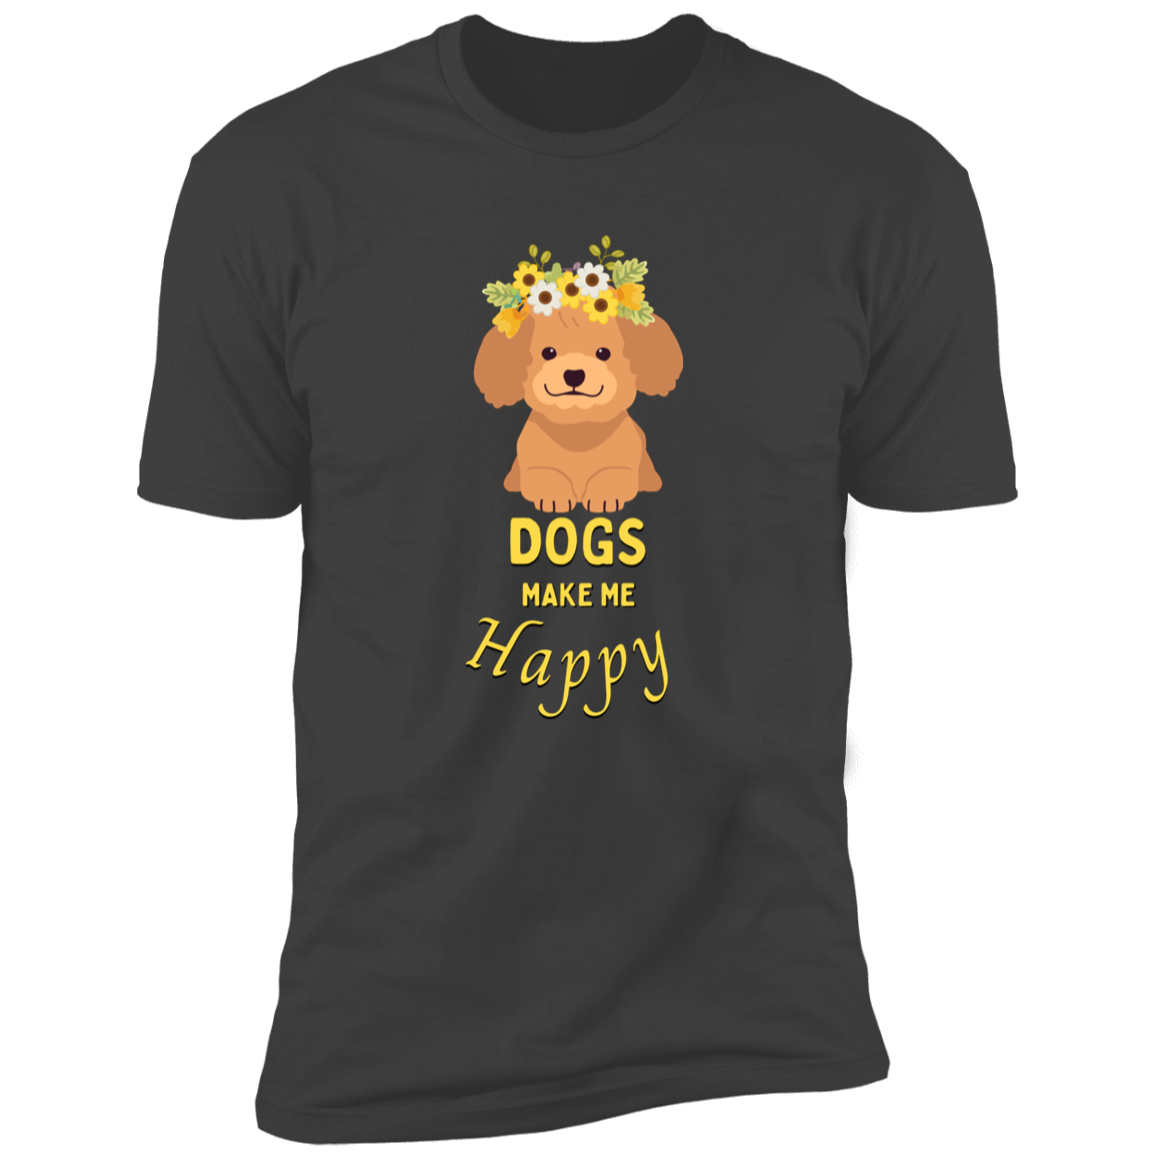 Dogs Make Me Happy t-shirt, funny dog shirt for humans, in heavy metal gray